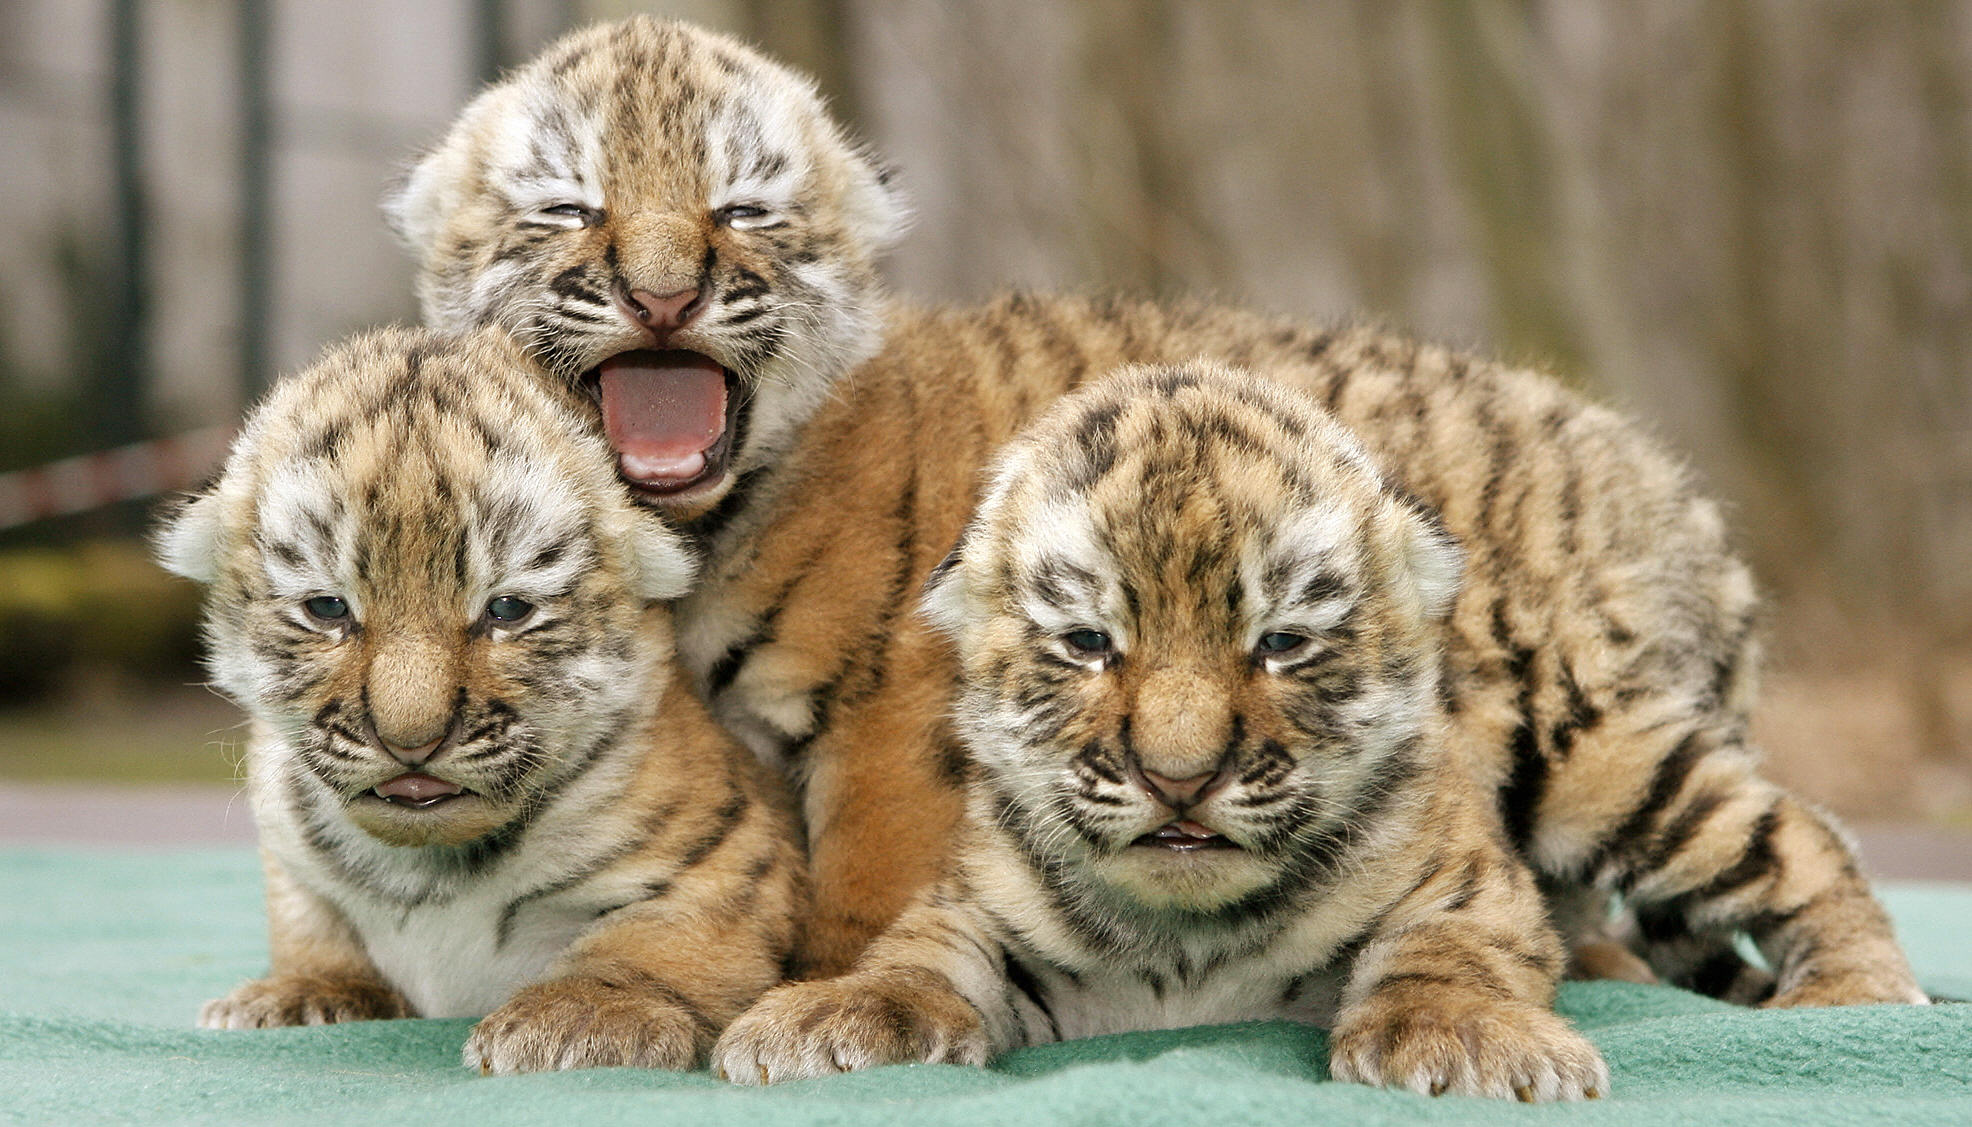 pictures of baby tigers and wallpaper Download